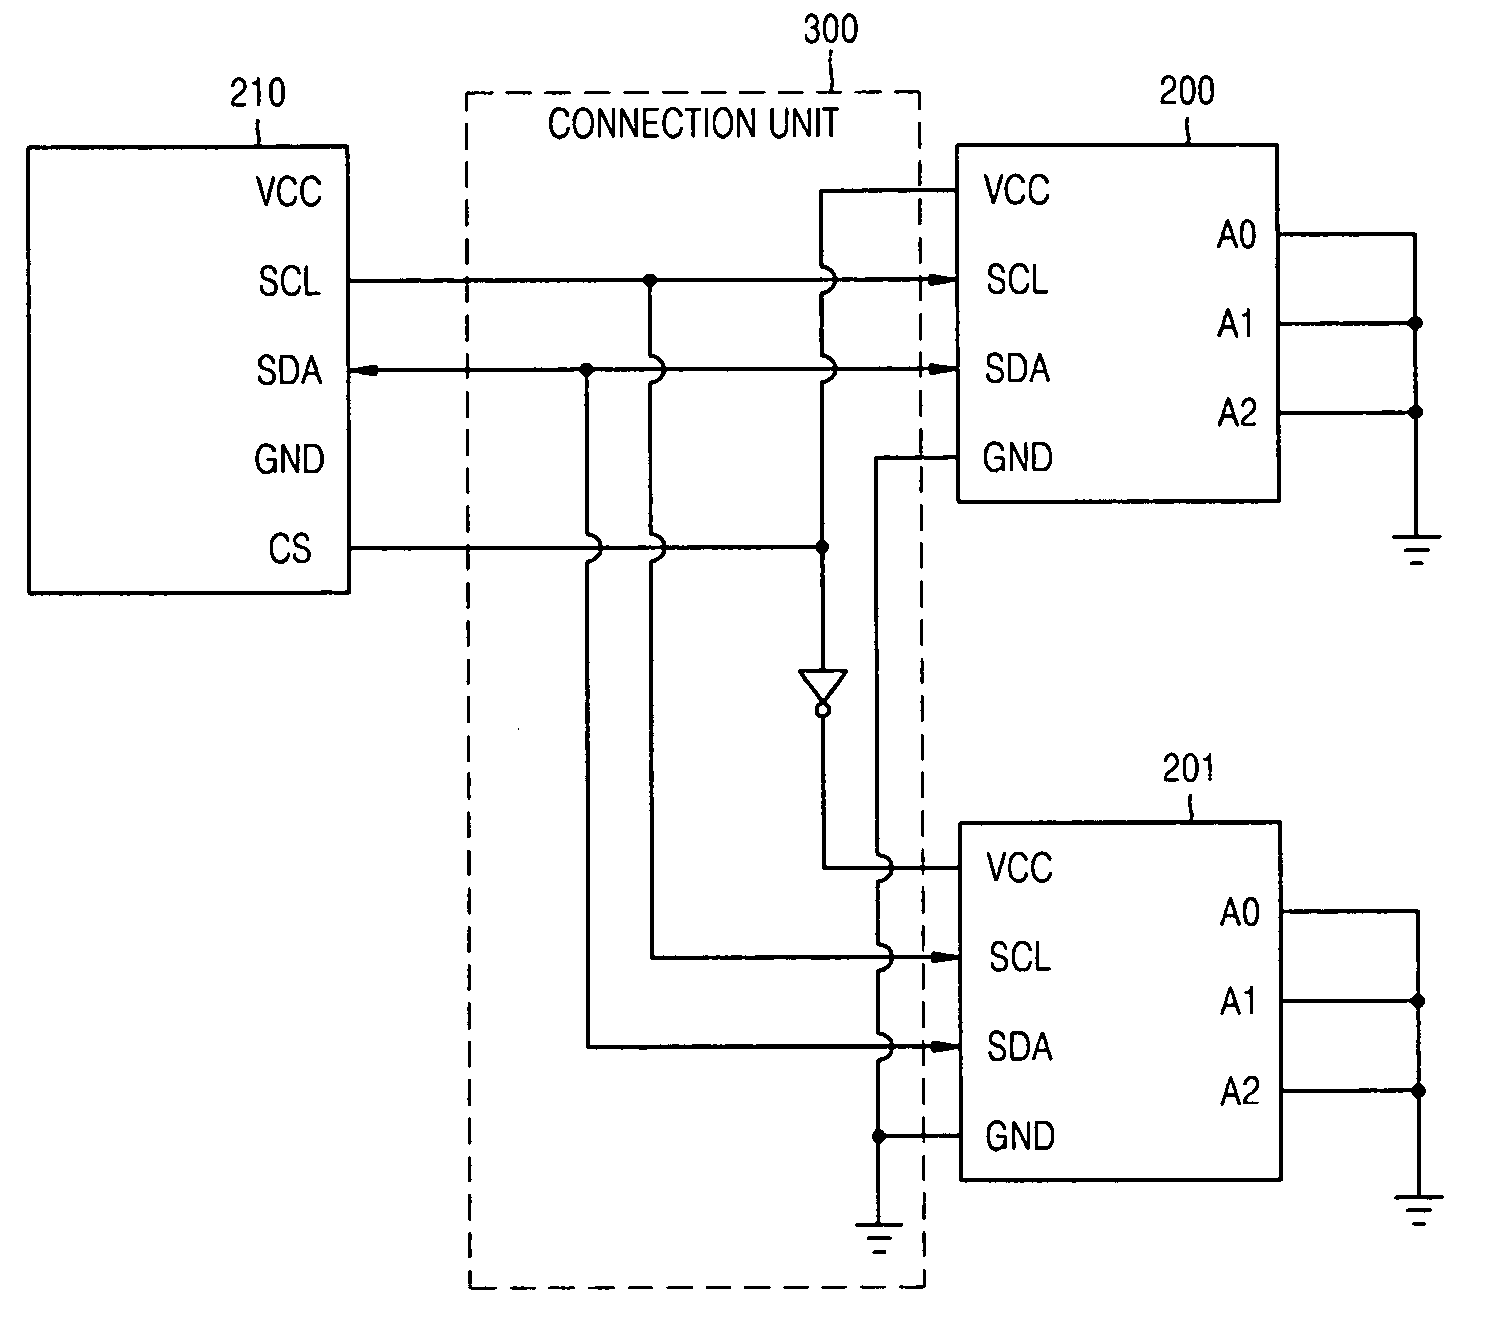 Apparatus to recognize memory devices